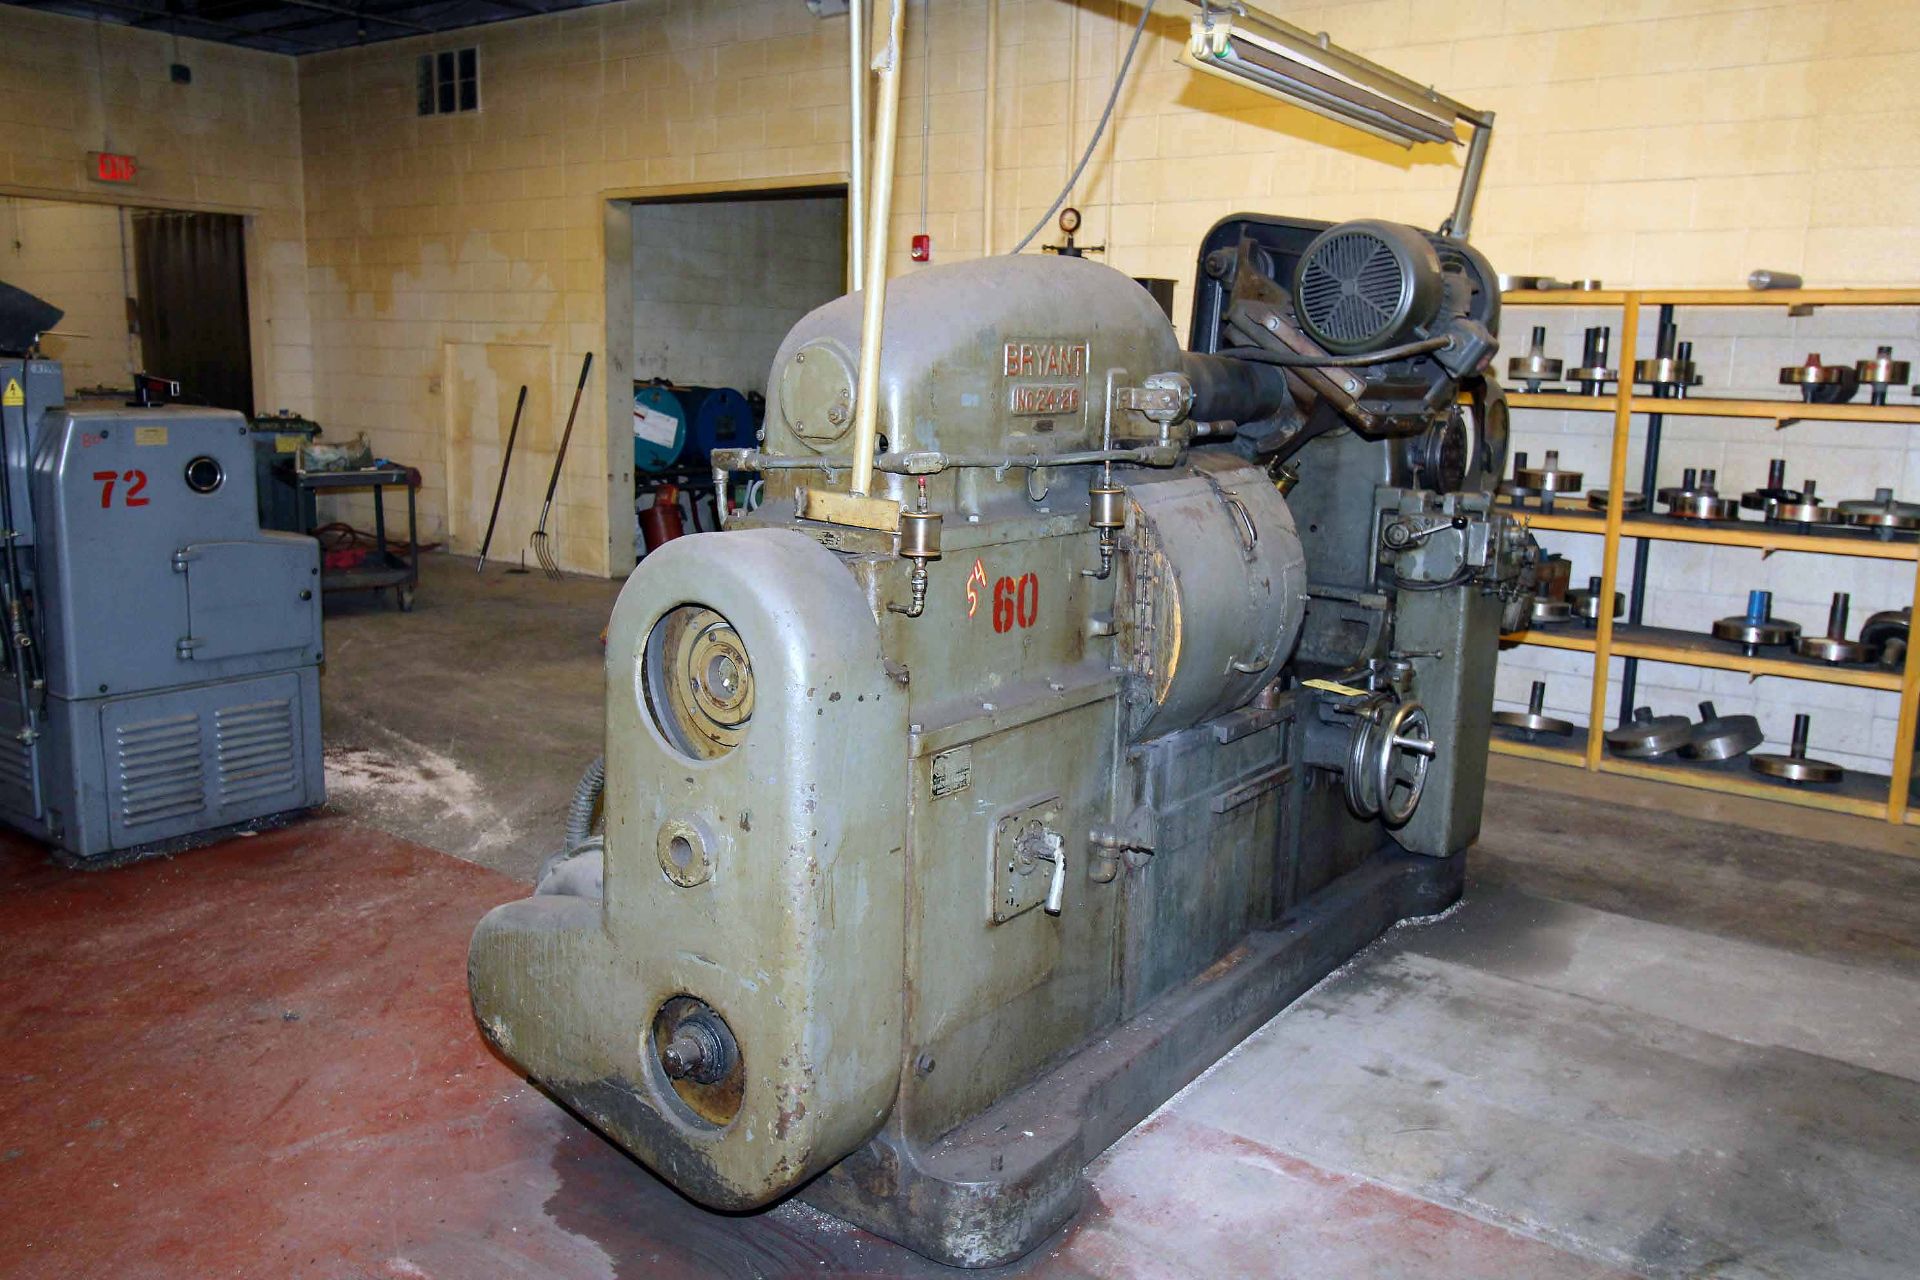 INTERNAL GRINDER, BRYANT NO. 24-26, 15 HP grinding spdl. drive, 18” dia. 6-jaw chuck, auto. - Image 6 of 7